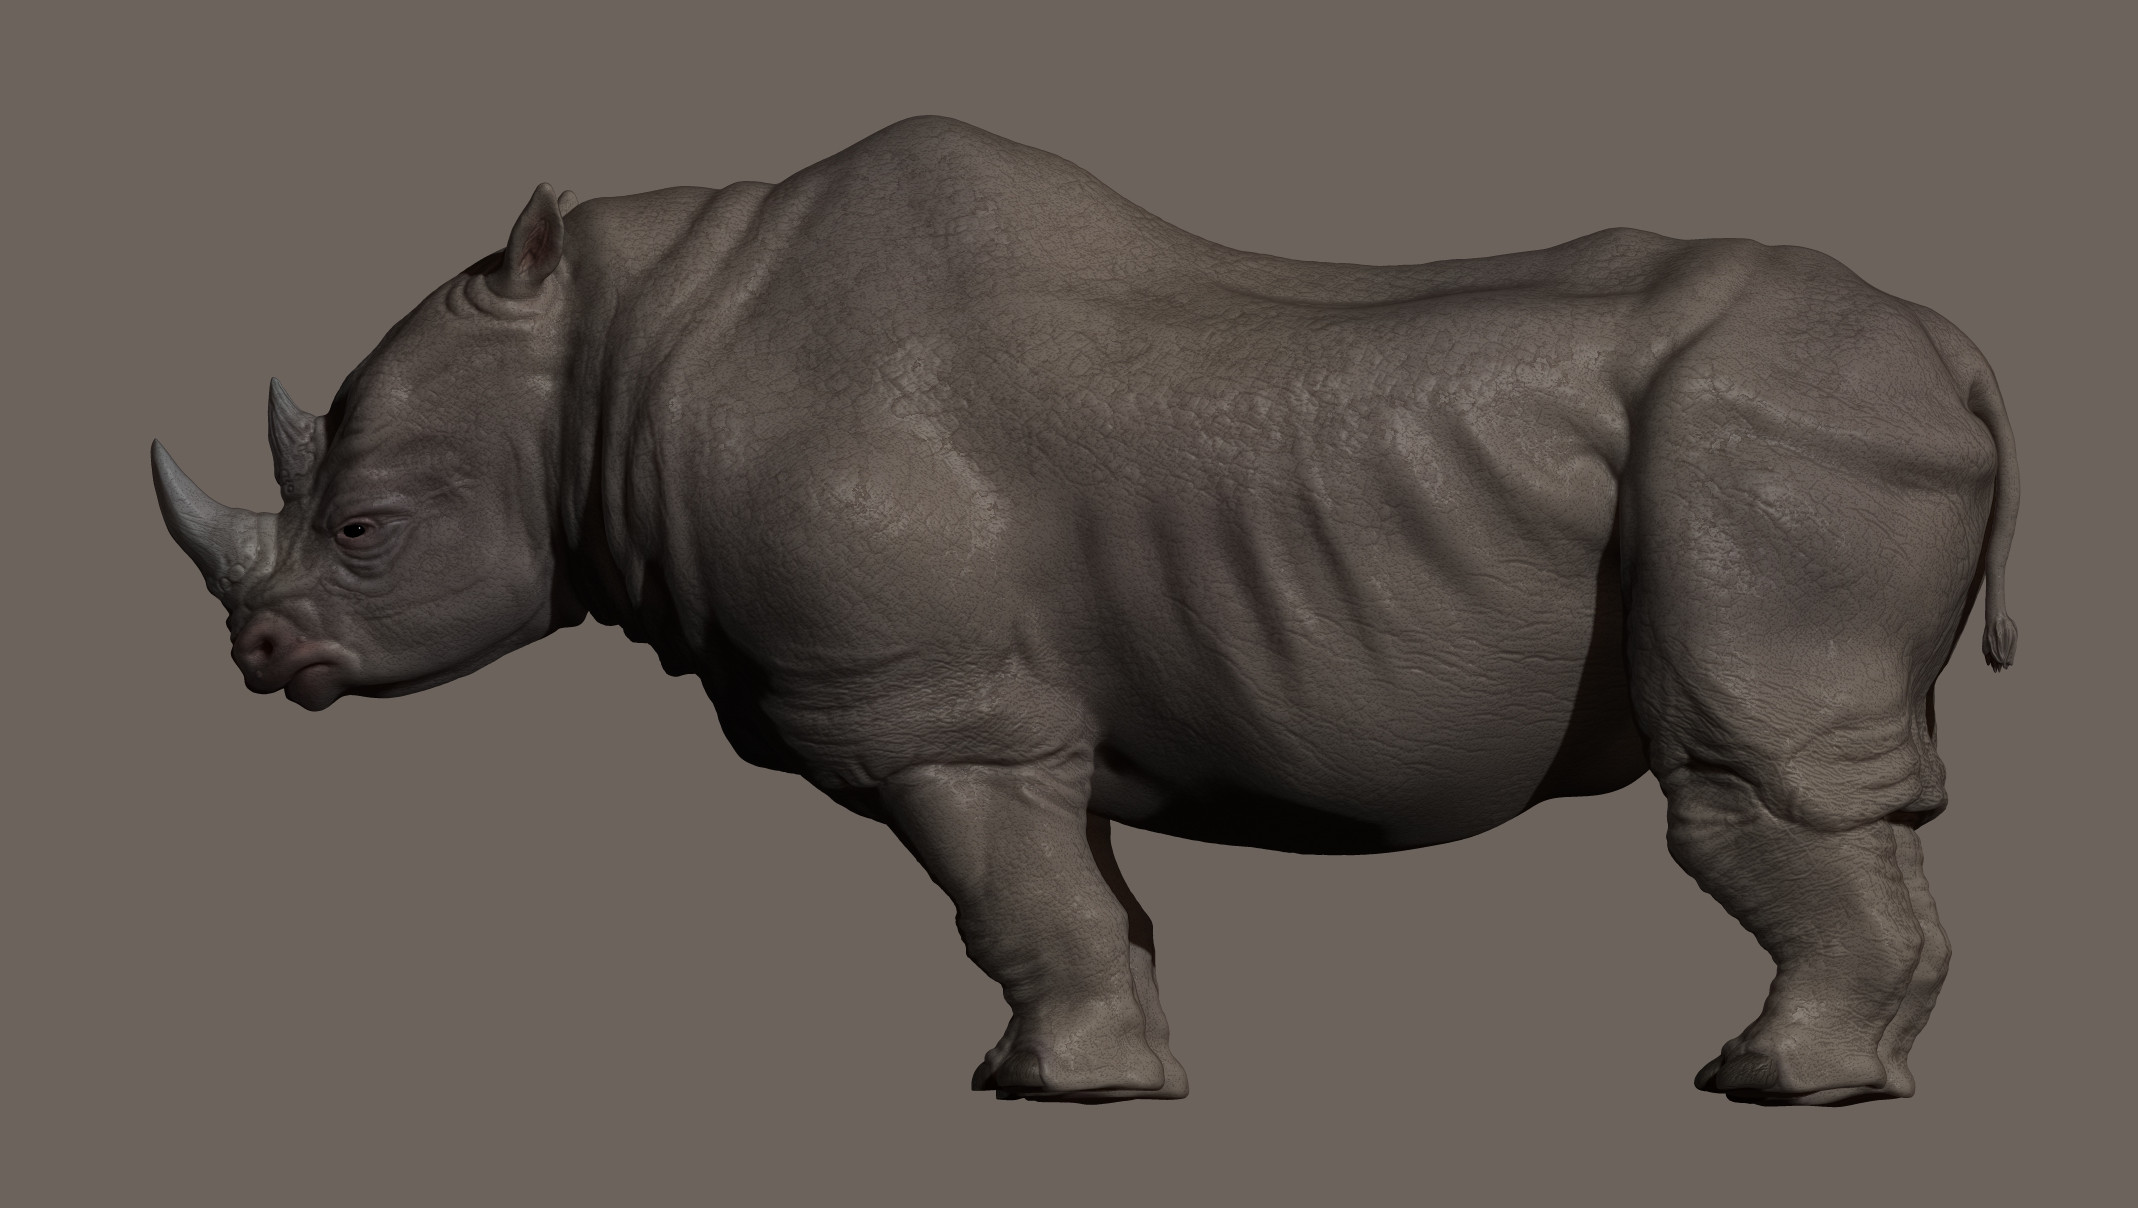 Side view of the High poly model.